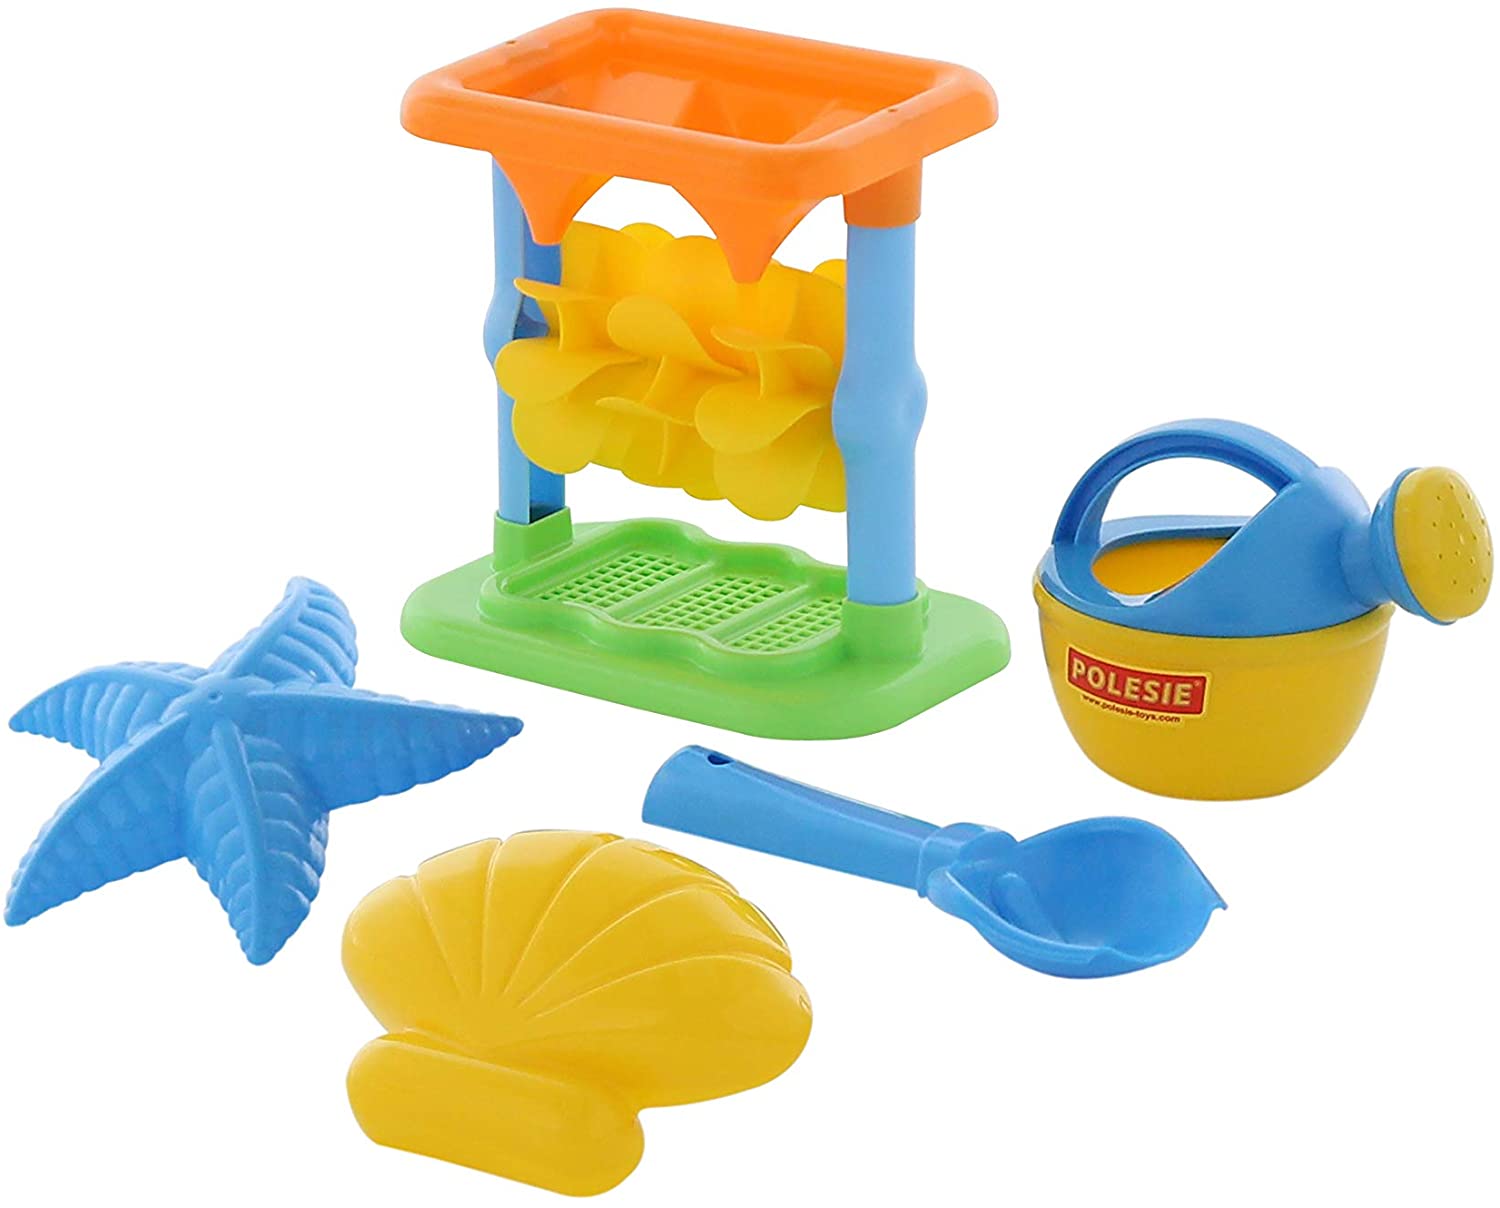 Polesie 35738 Sand No2 + Sand Mill Set With Watering Can Mini, 5 Pieces (No